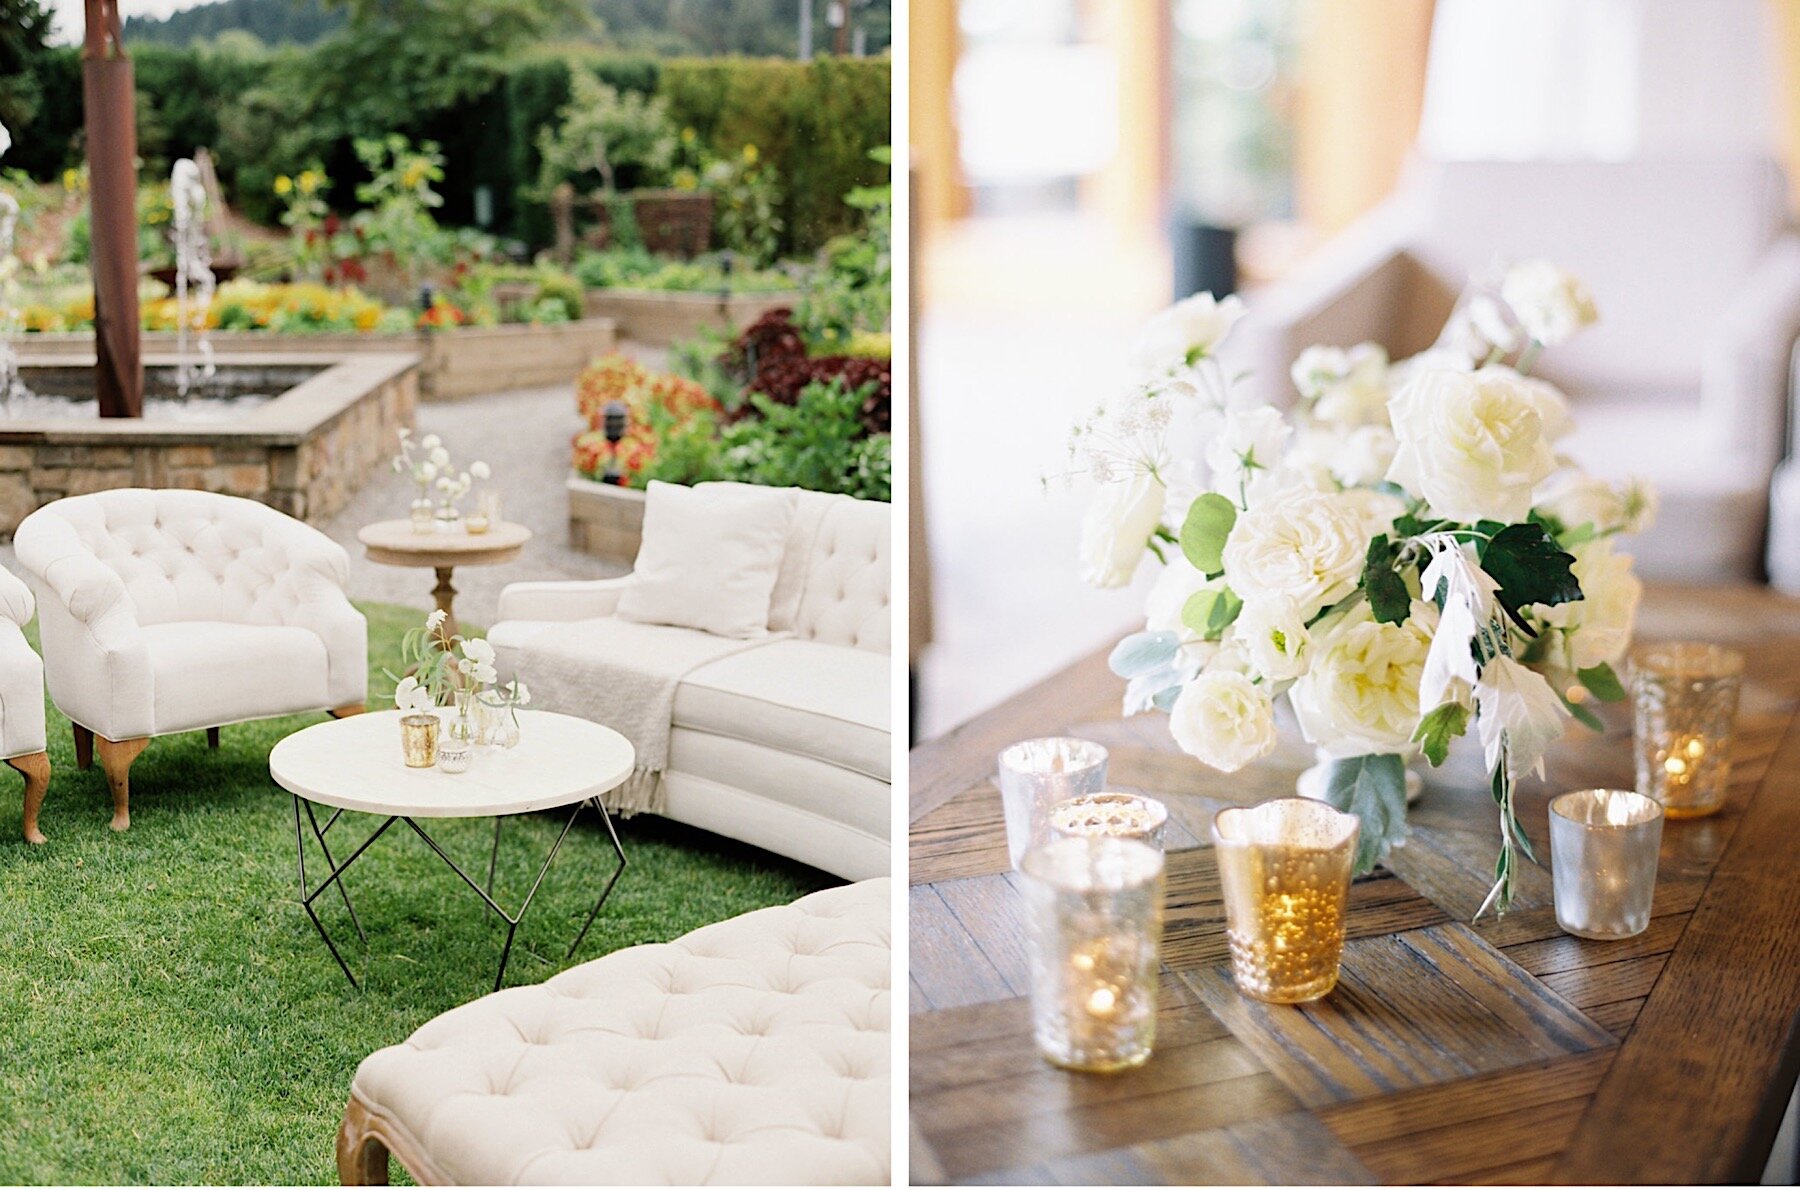 08_top_White_Lodge_luxury_green_Company_by_at_Design_and_Seattle_florist_Gather_wedding_Willows.jpg